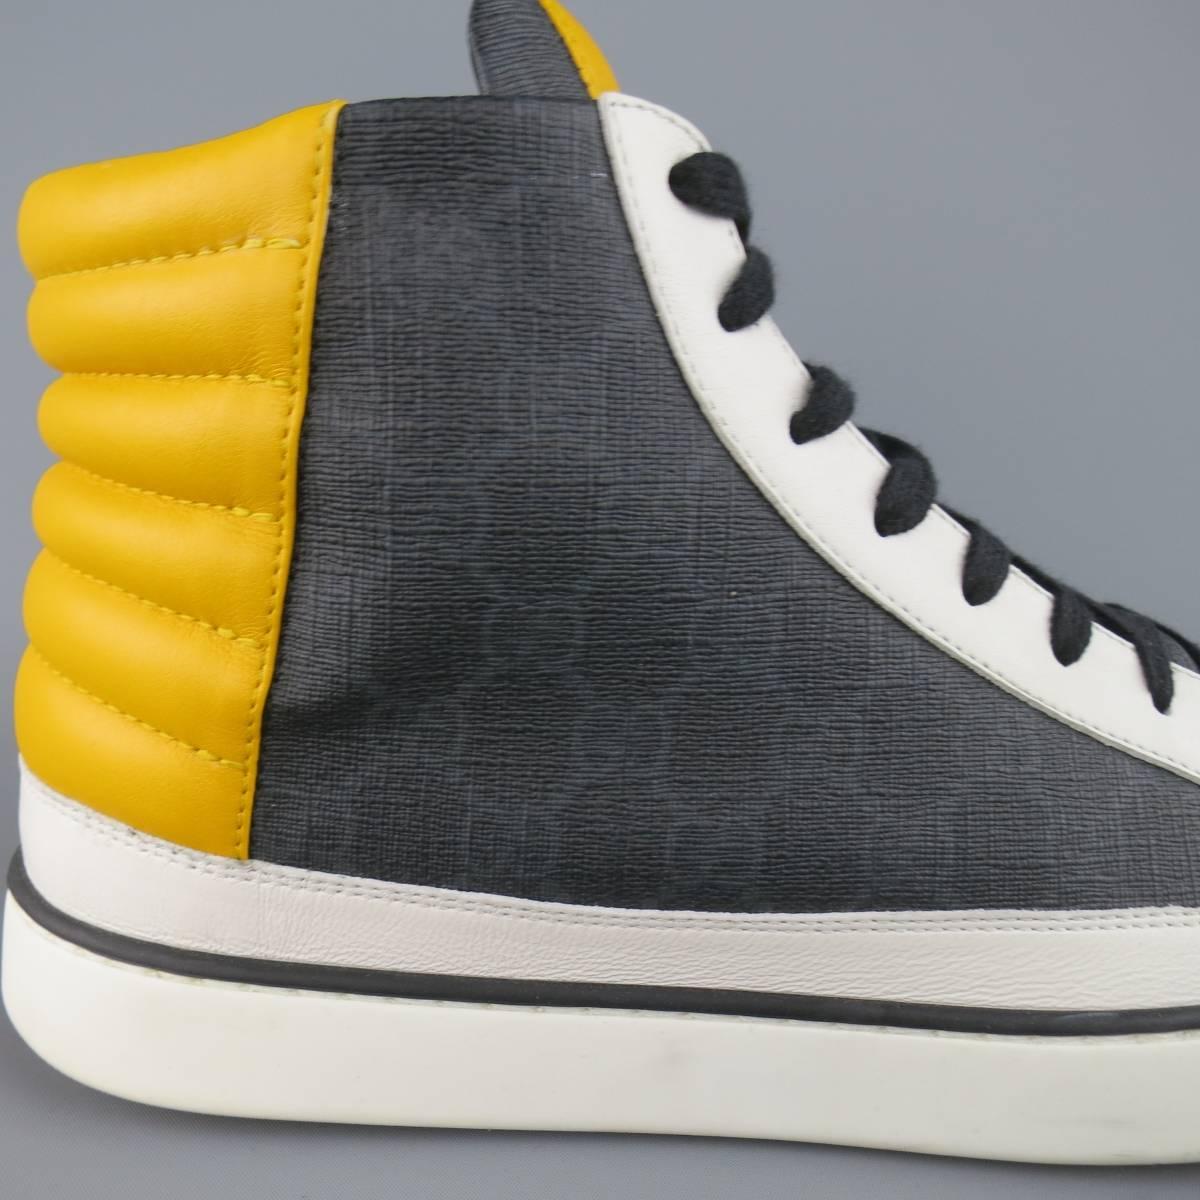 Black Men's GUCCI Size 13.5 White & Yellow Navy Monogram Leather High Top Sneakers